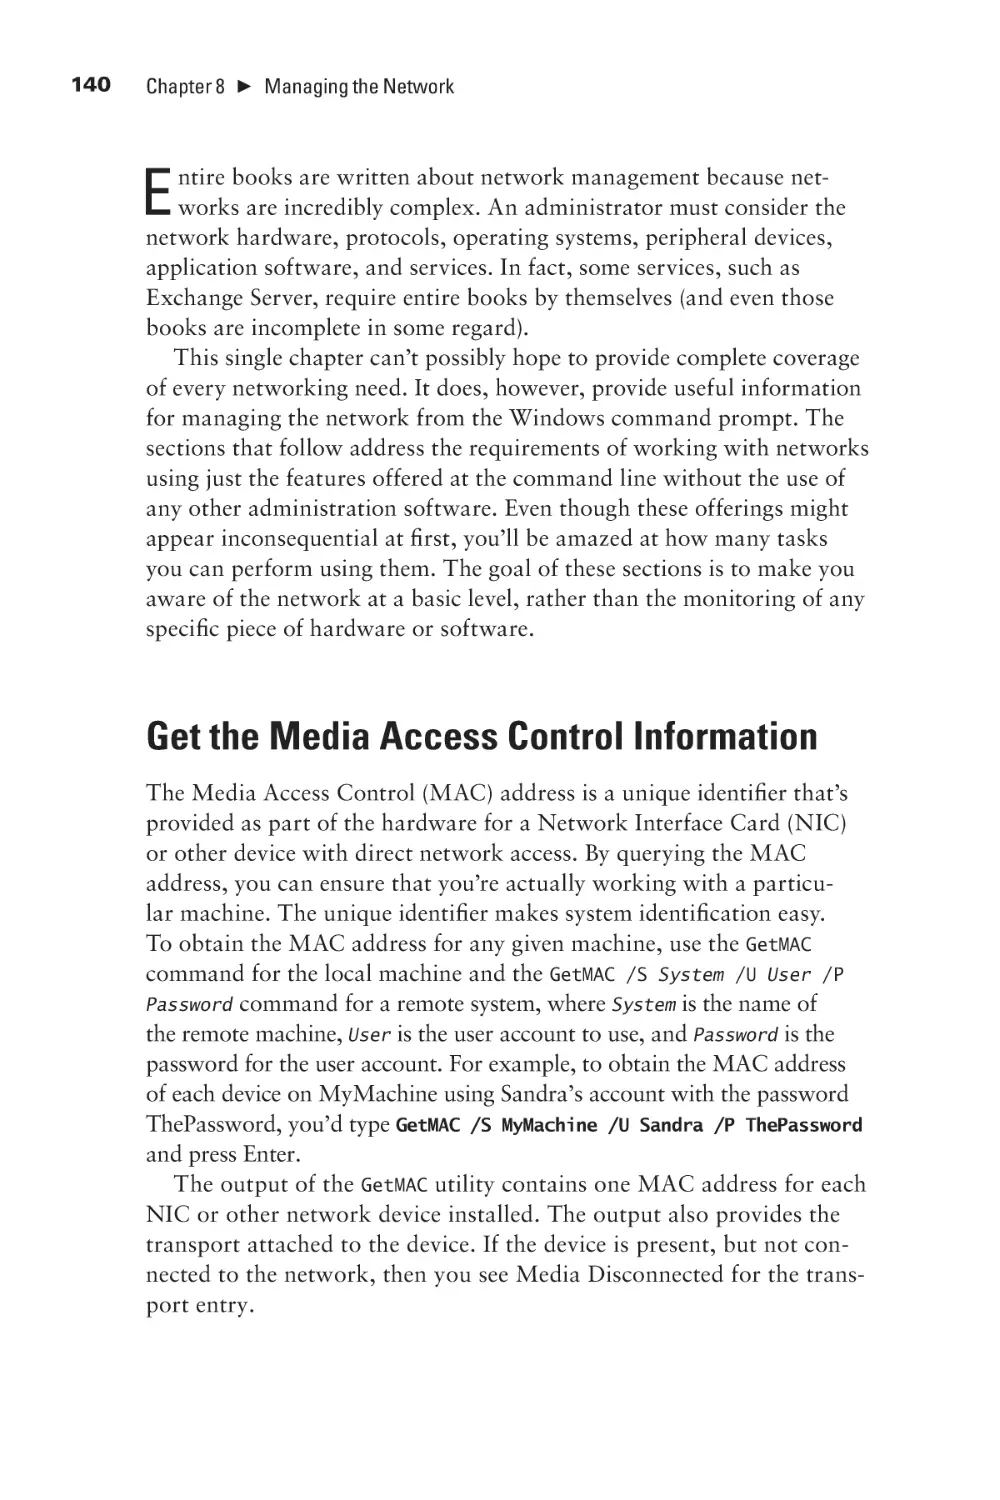 Get the Media Access Control Information